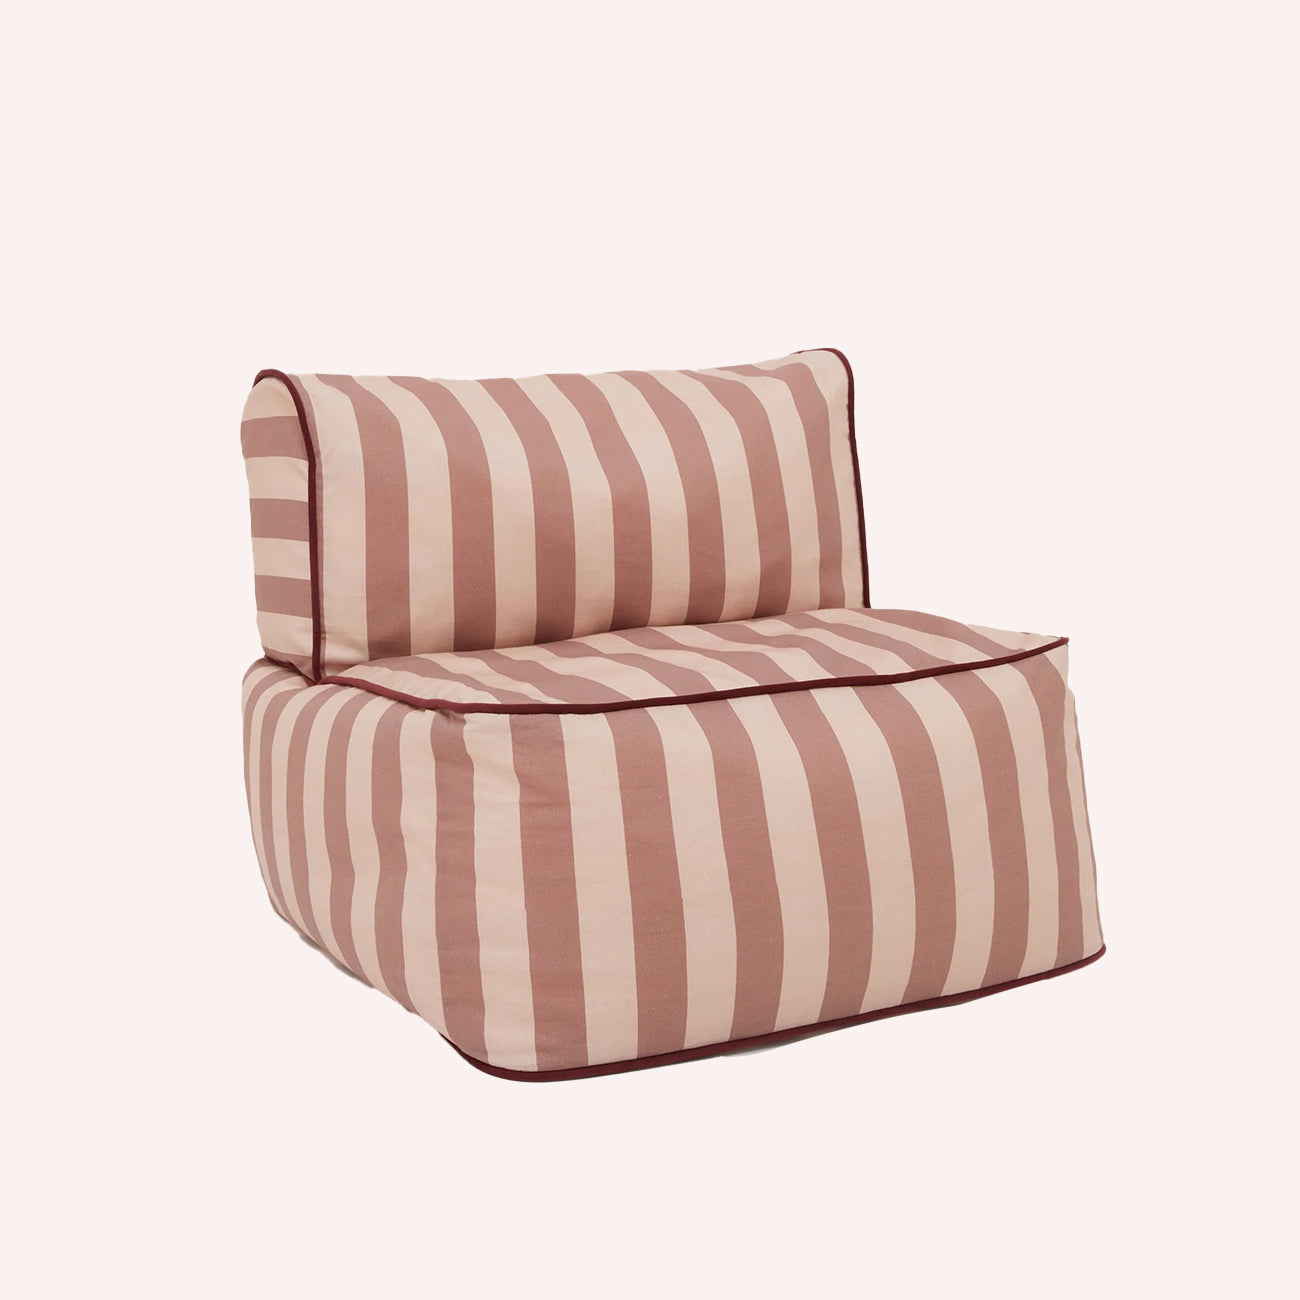 Striped Toddler Lounger - Red